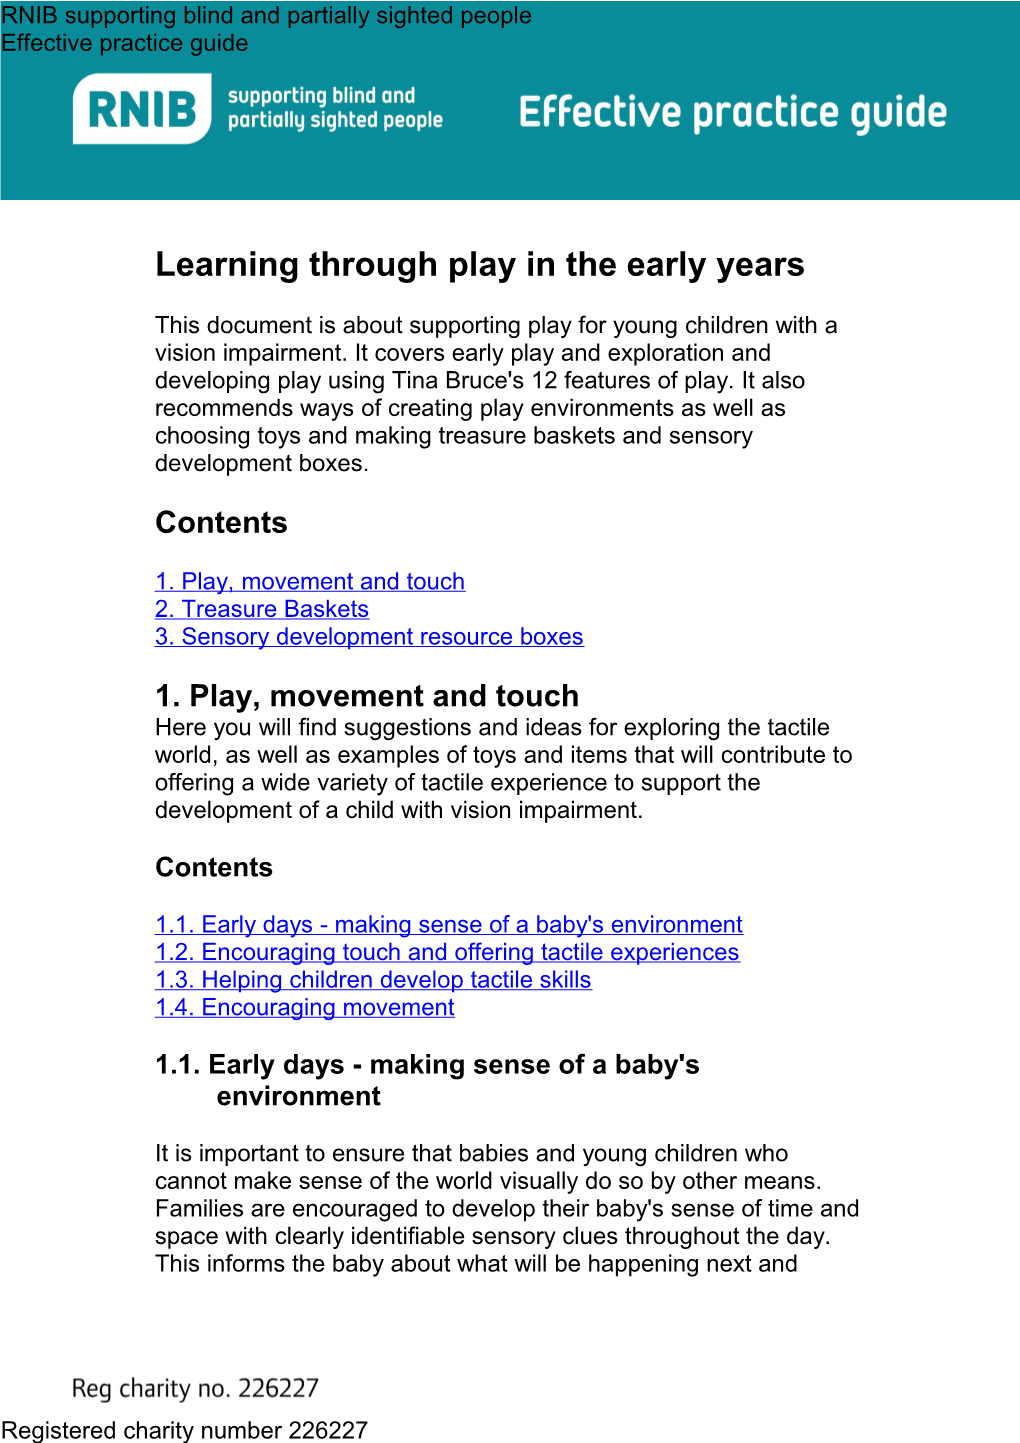 Play, Movement and Touch